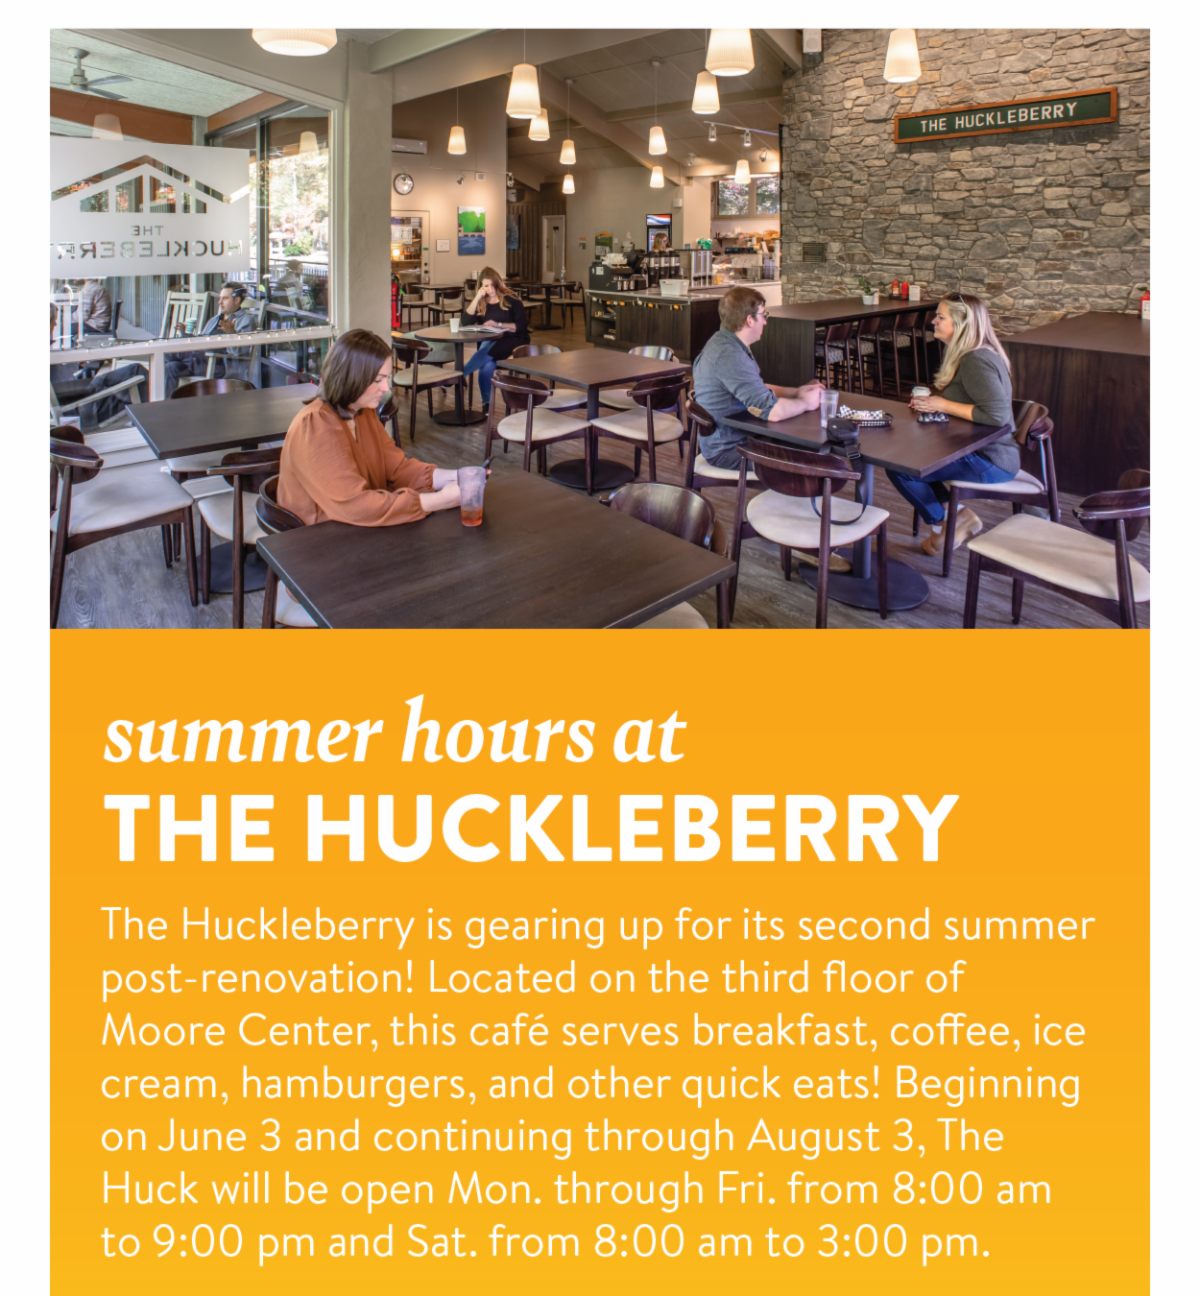 summer hours at The Huckleberry - The Huckleberry is gearing up for its second summer post-renovation! Located on the third floor of Moore Center, this café serves breakfast, coffee, ice cream, hamburgers, and other quick eats! Beginning on June 3 and continuing through August 3, The Huck will be open Mon. through Fri. from 8:00 am to 9:00 pm and Sat. from 8:00 am to 3:00 pm.